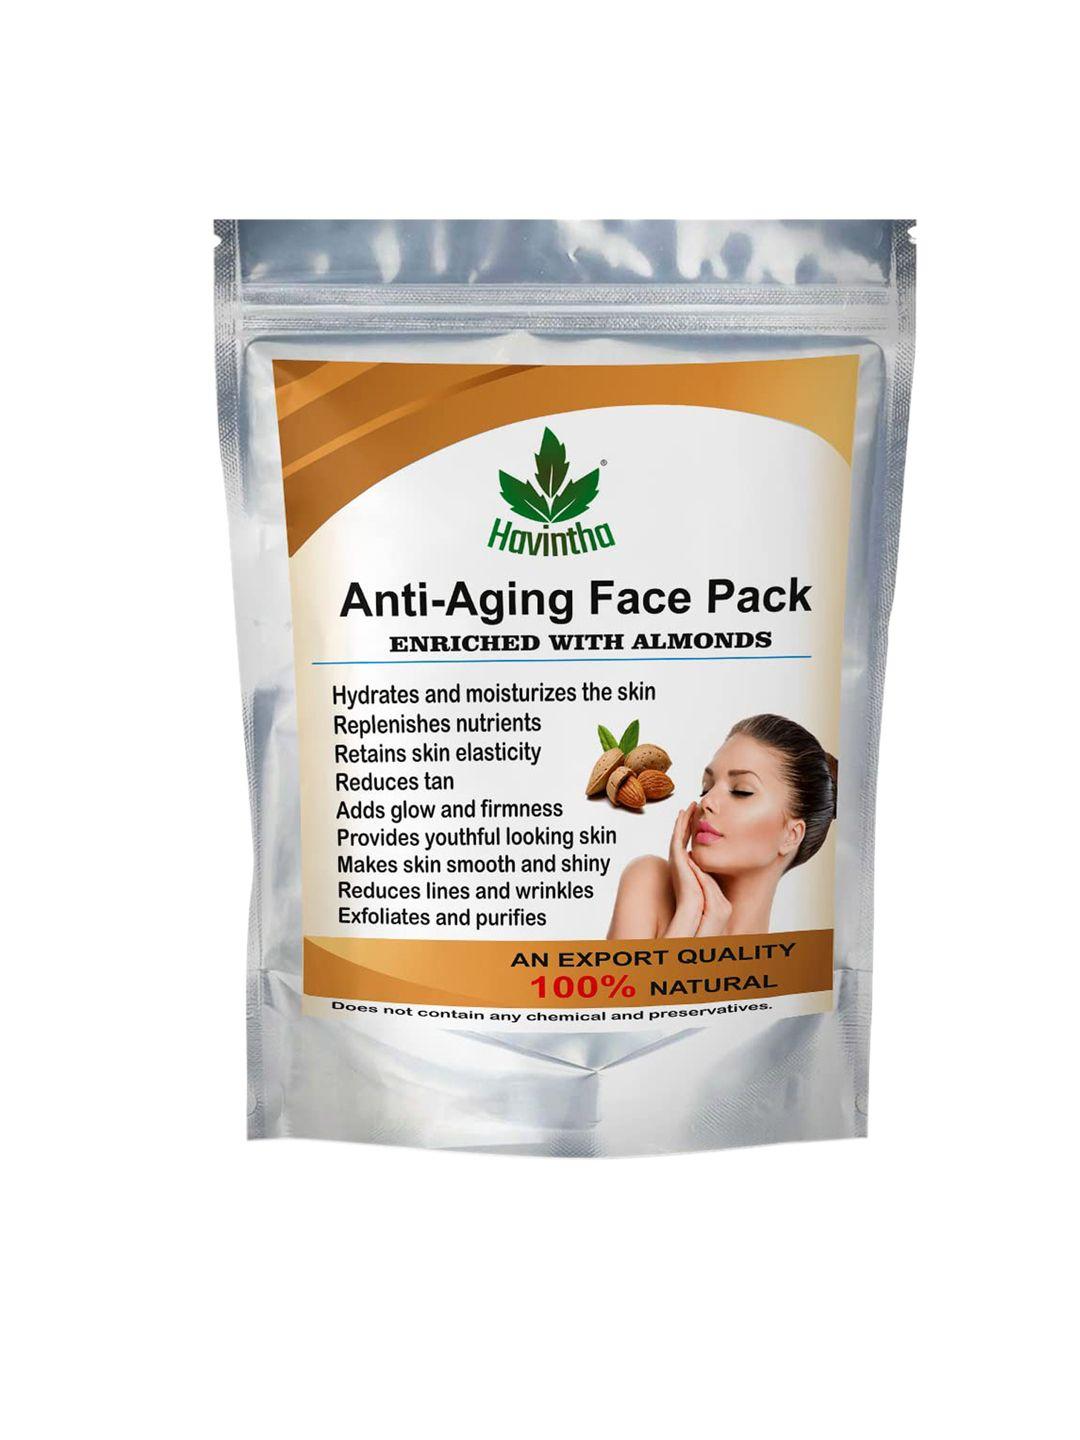 havintha almonds anti-aging face pack with almond 227 g